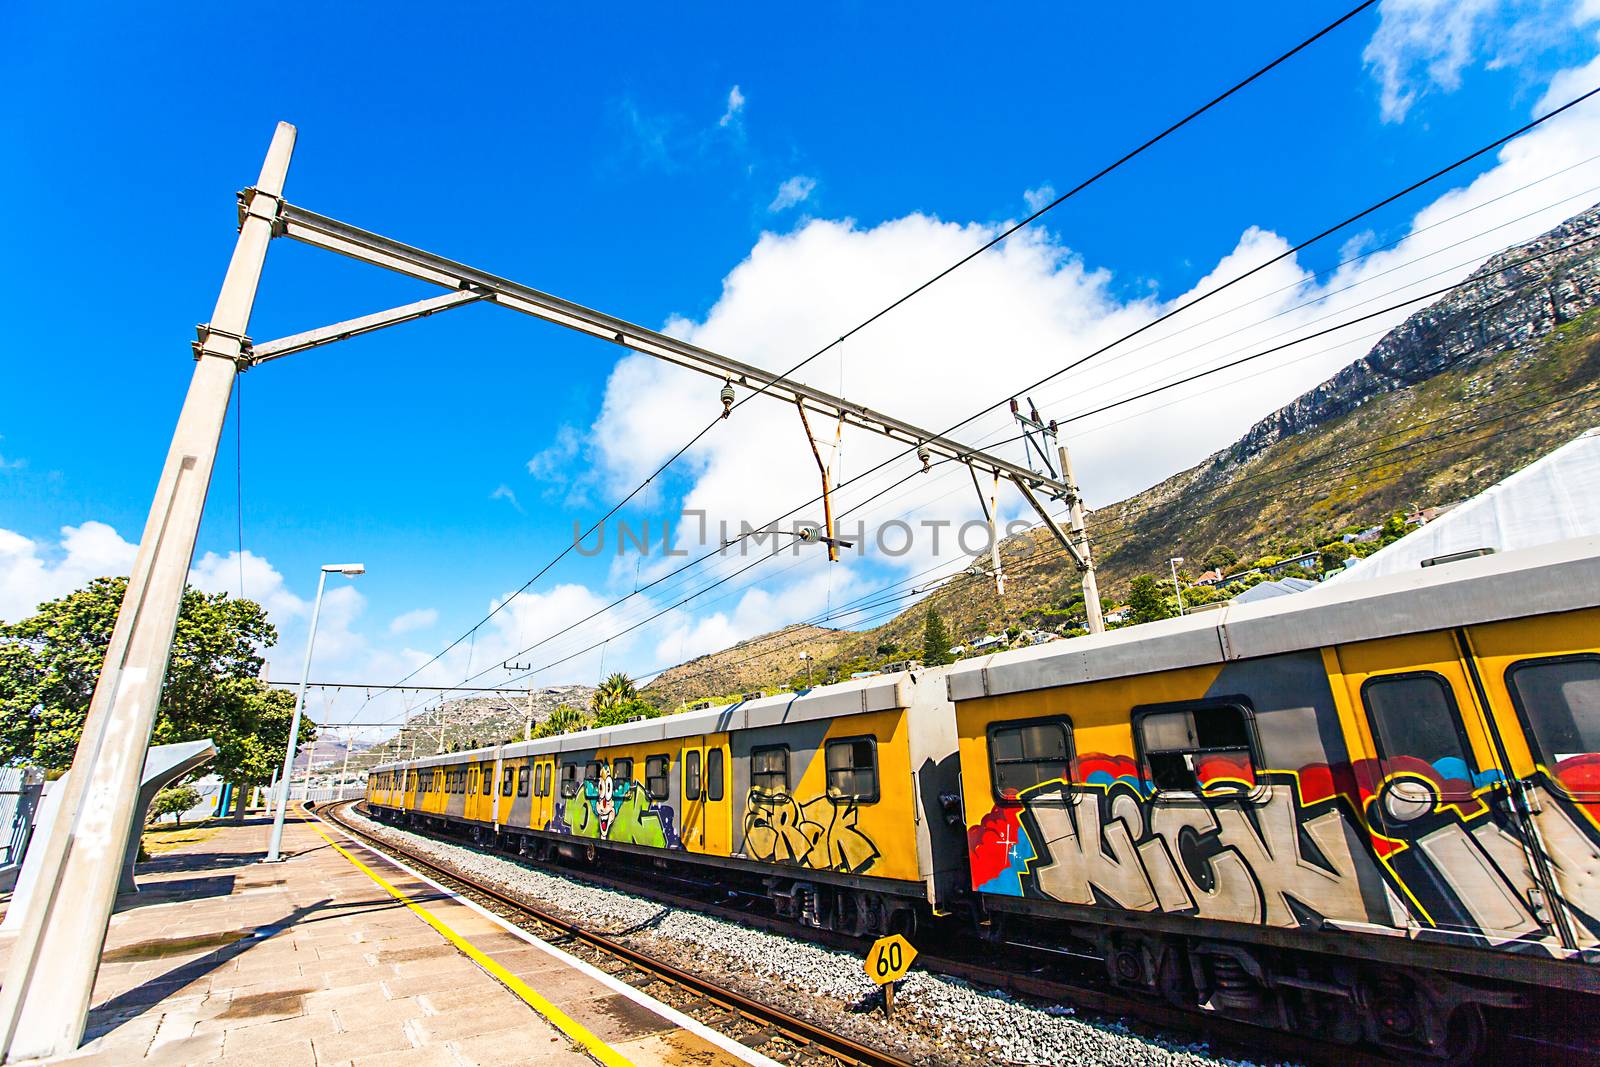 Train station of St.James South Africa by Makeral